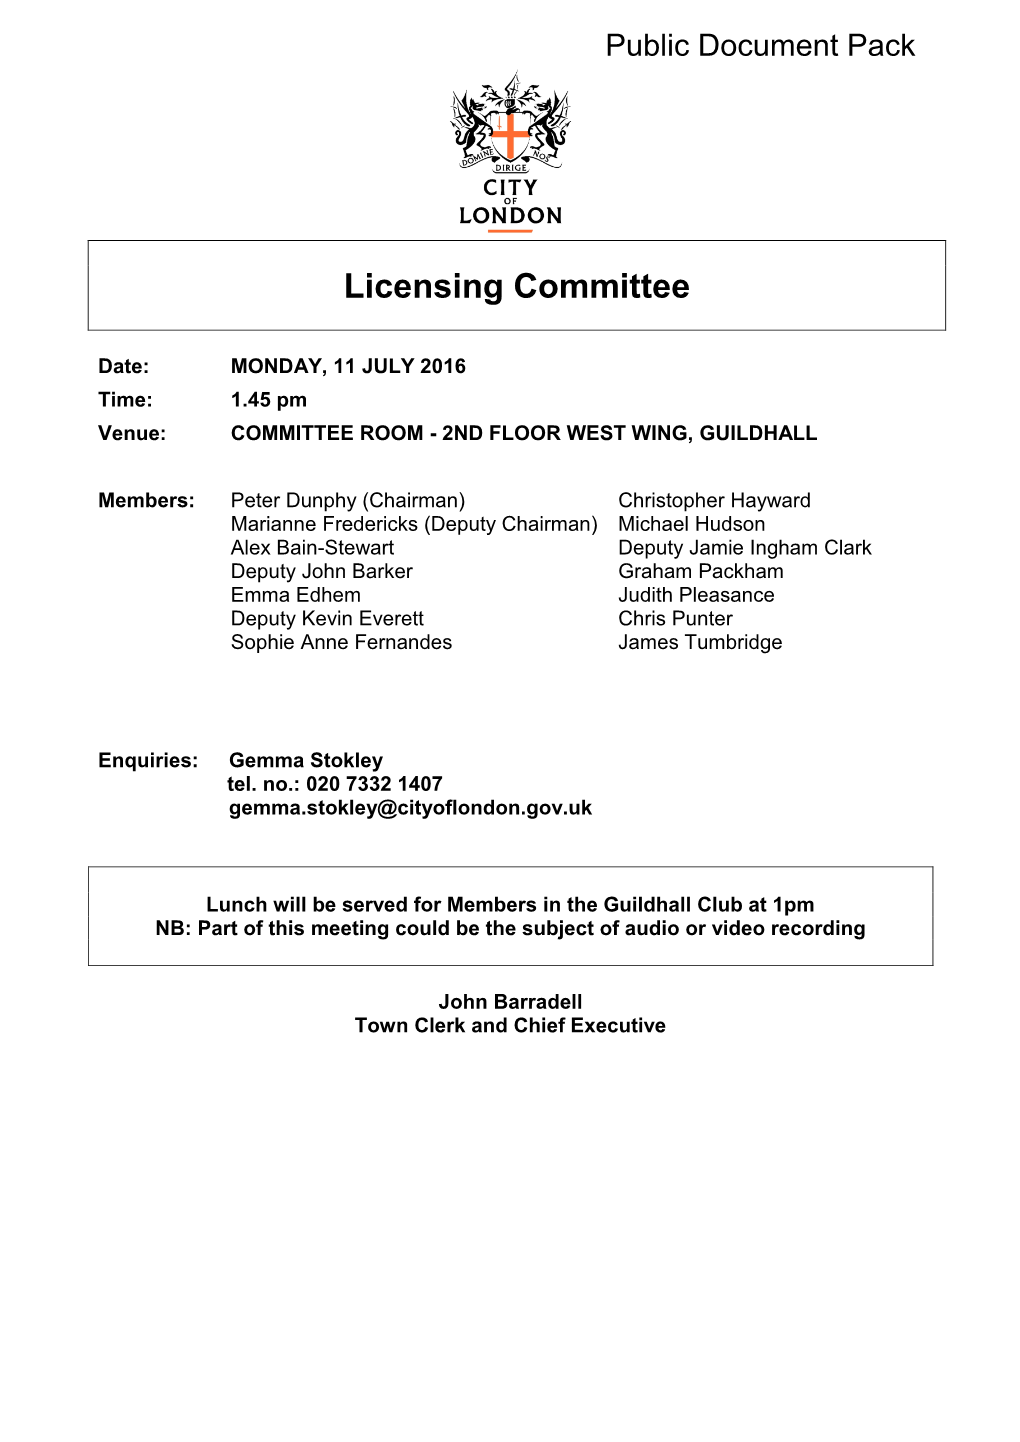 (Public Pack)Agenda Document for Licensing Committee, 11/07/2016